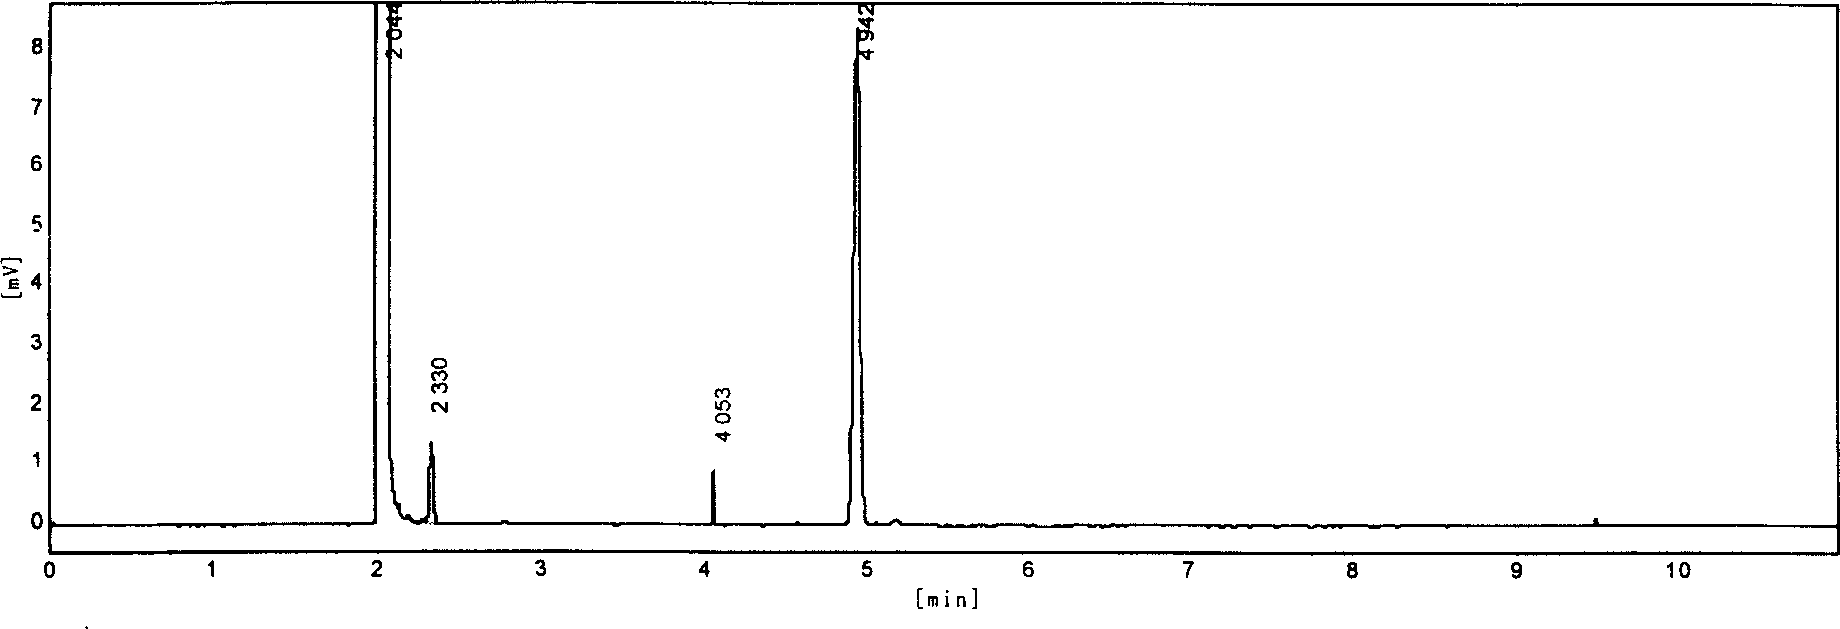 Method for extracting 2 - ethyl hexenal in polyvinyl butyral acetal, and measuring content